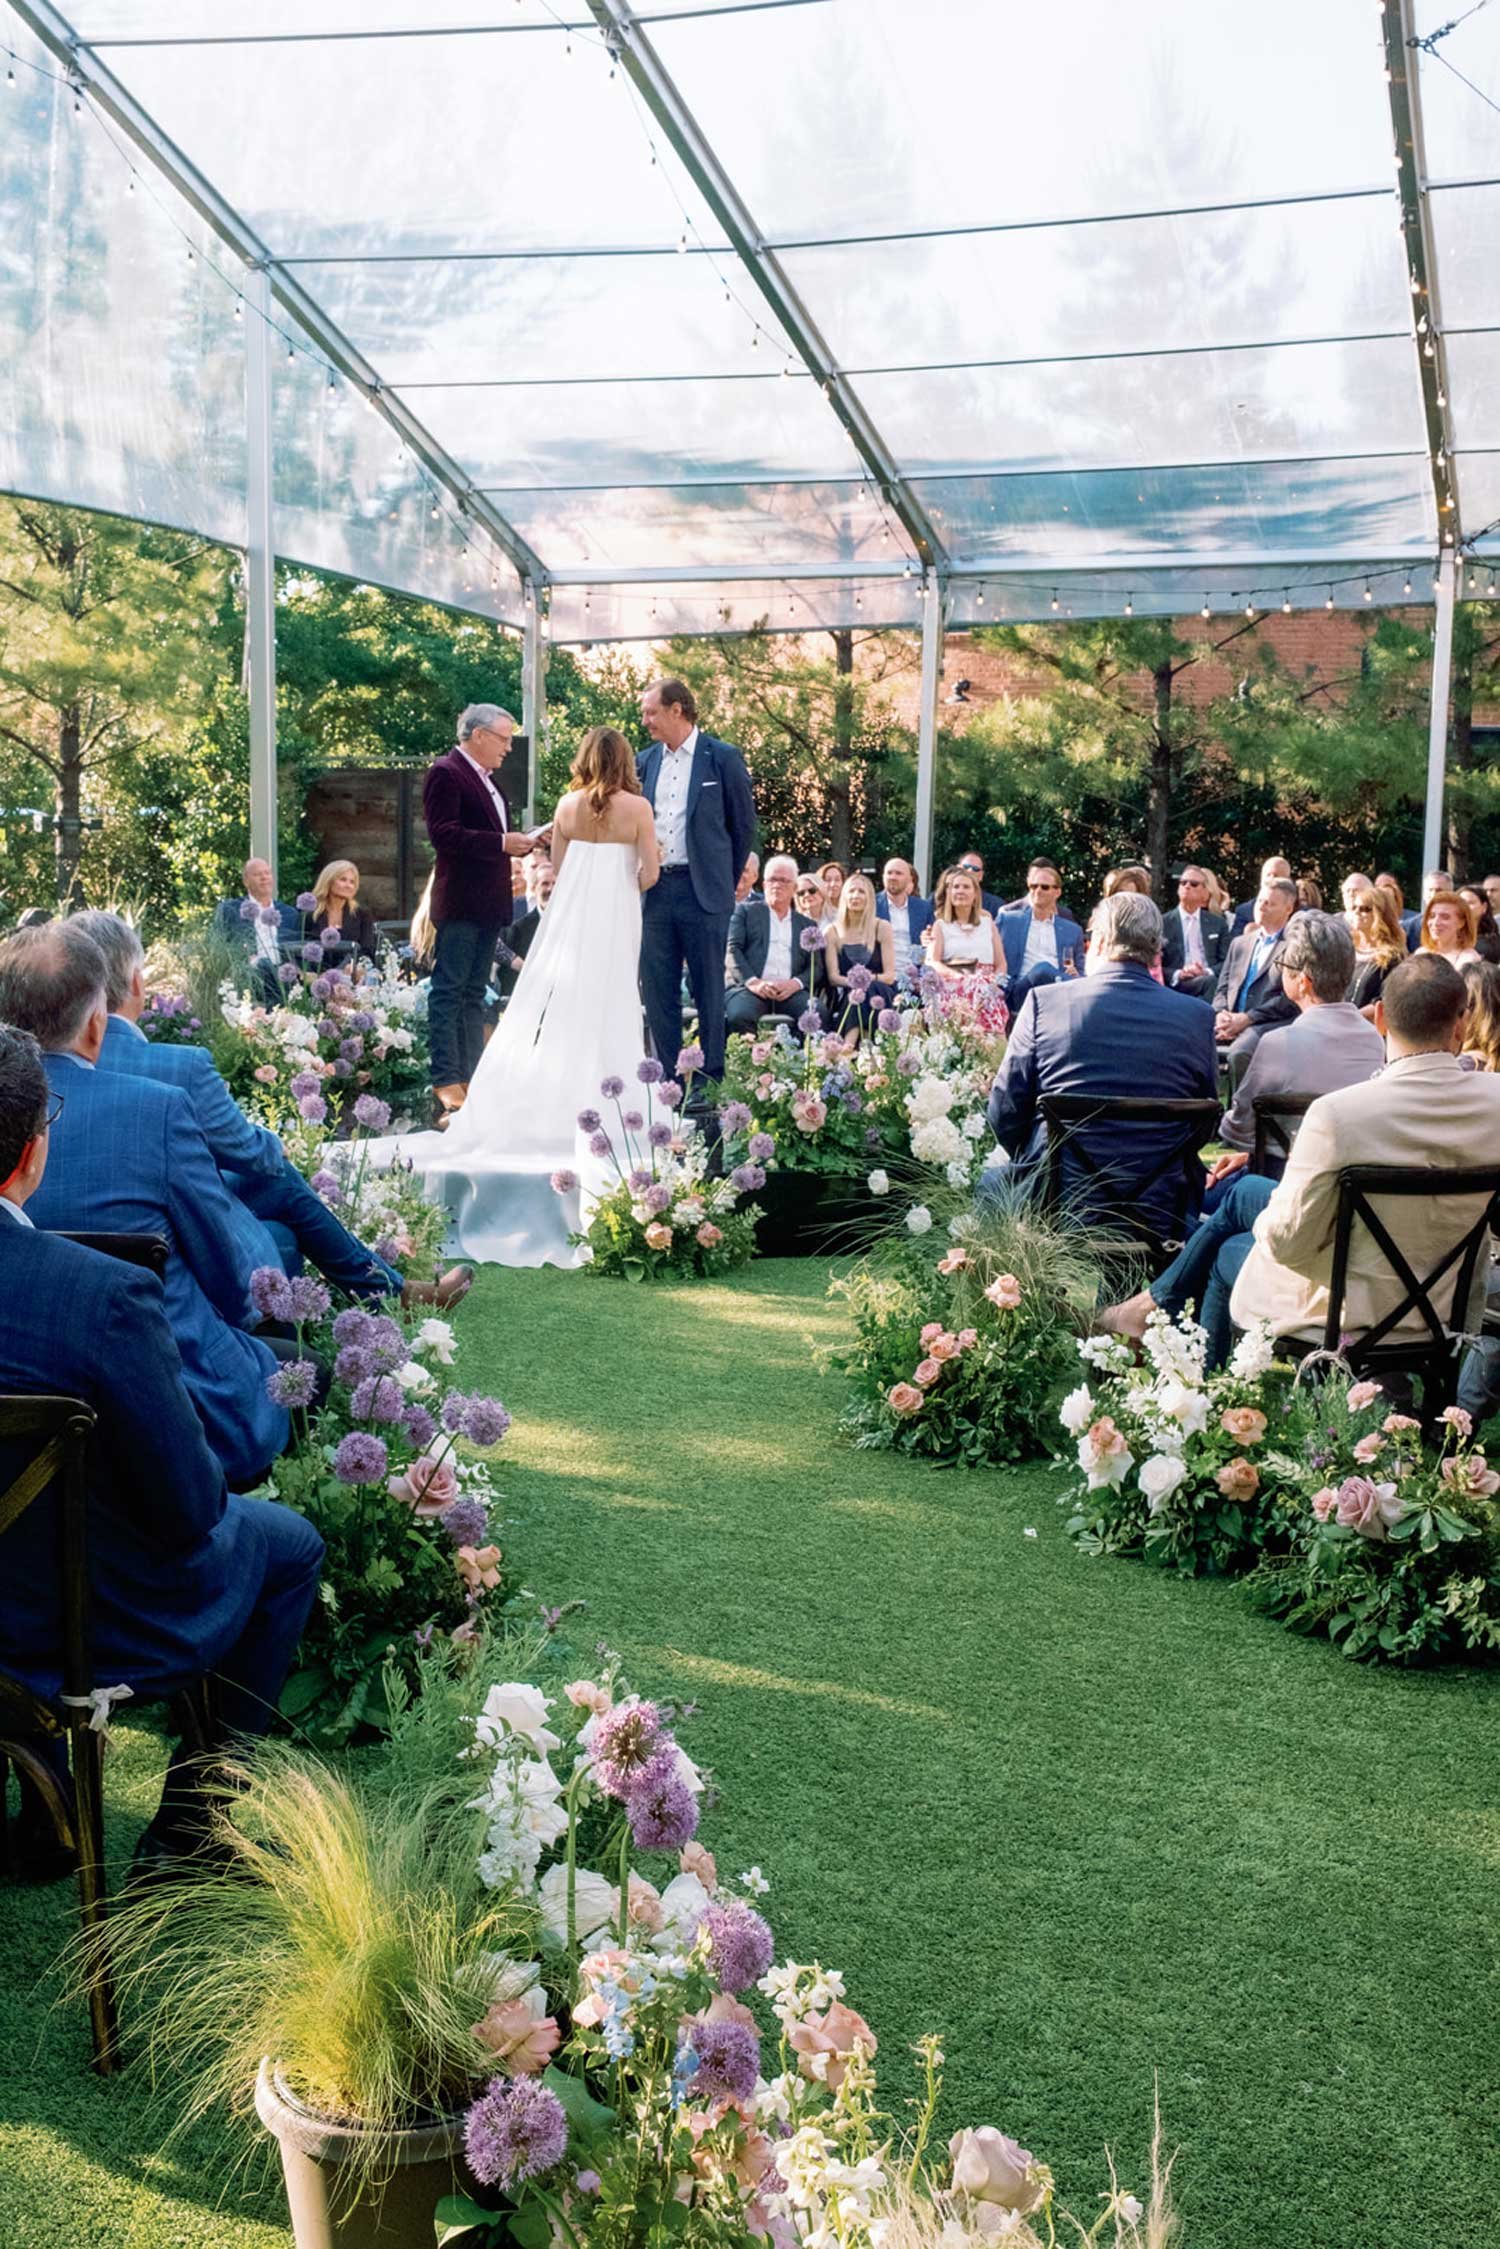 Outdoor wedding at hotel drover designed by Fort Worth wedding planner Shannon Rose Events